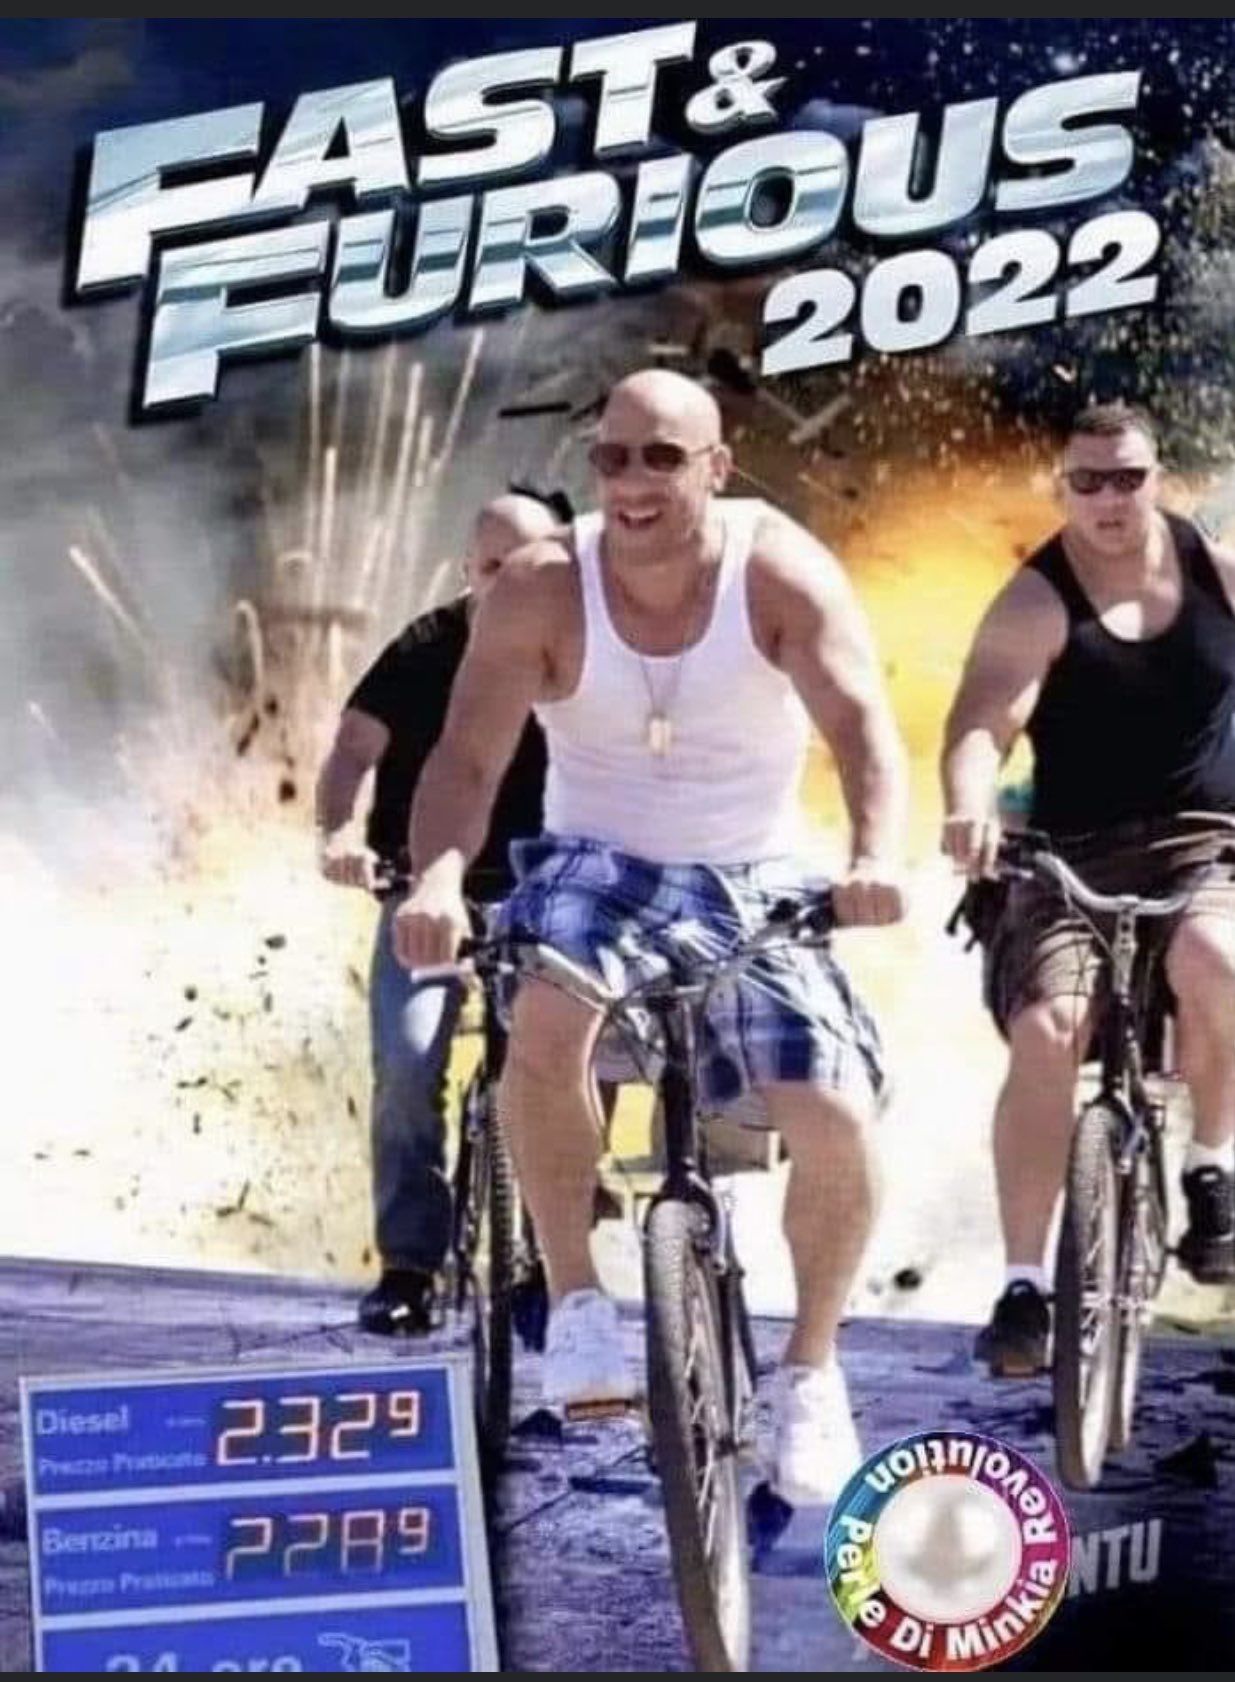 New Fast & Furious look lit